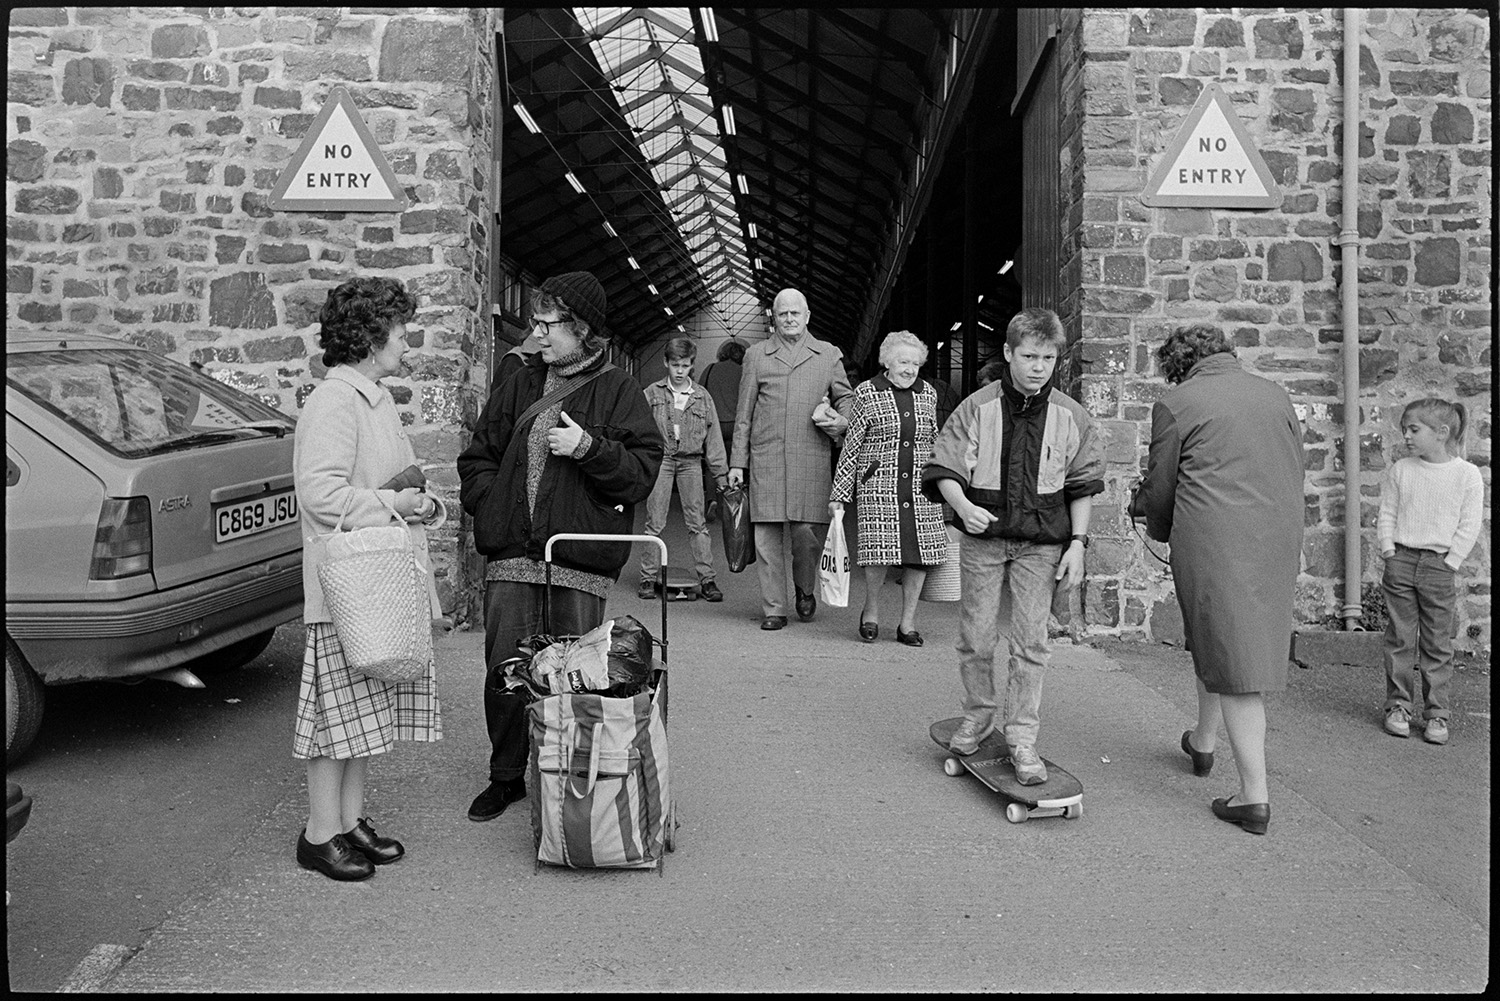 Market hall and cattle market, farmers chatting, loading cows on to trailer.
[People at the entrance to South Molton market, including a boy on a skateboard and two women chatting. There are two no entry signs fixed to the stone wall.]